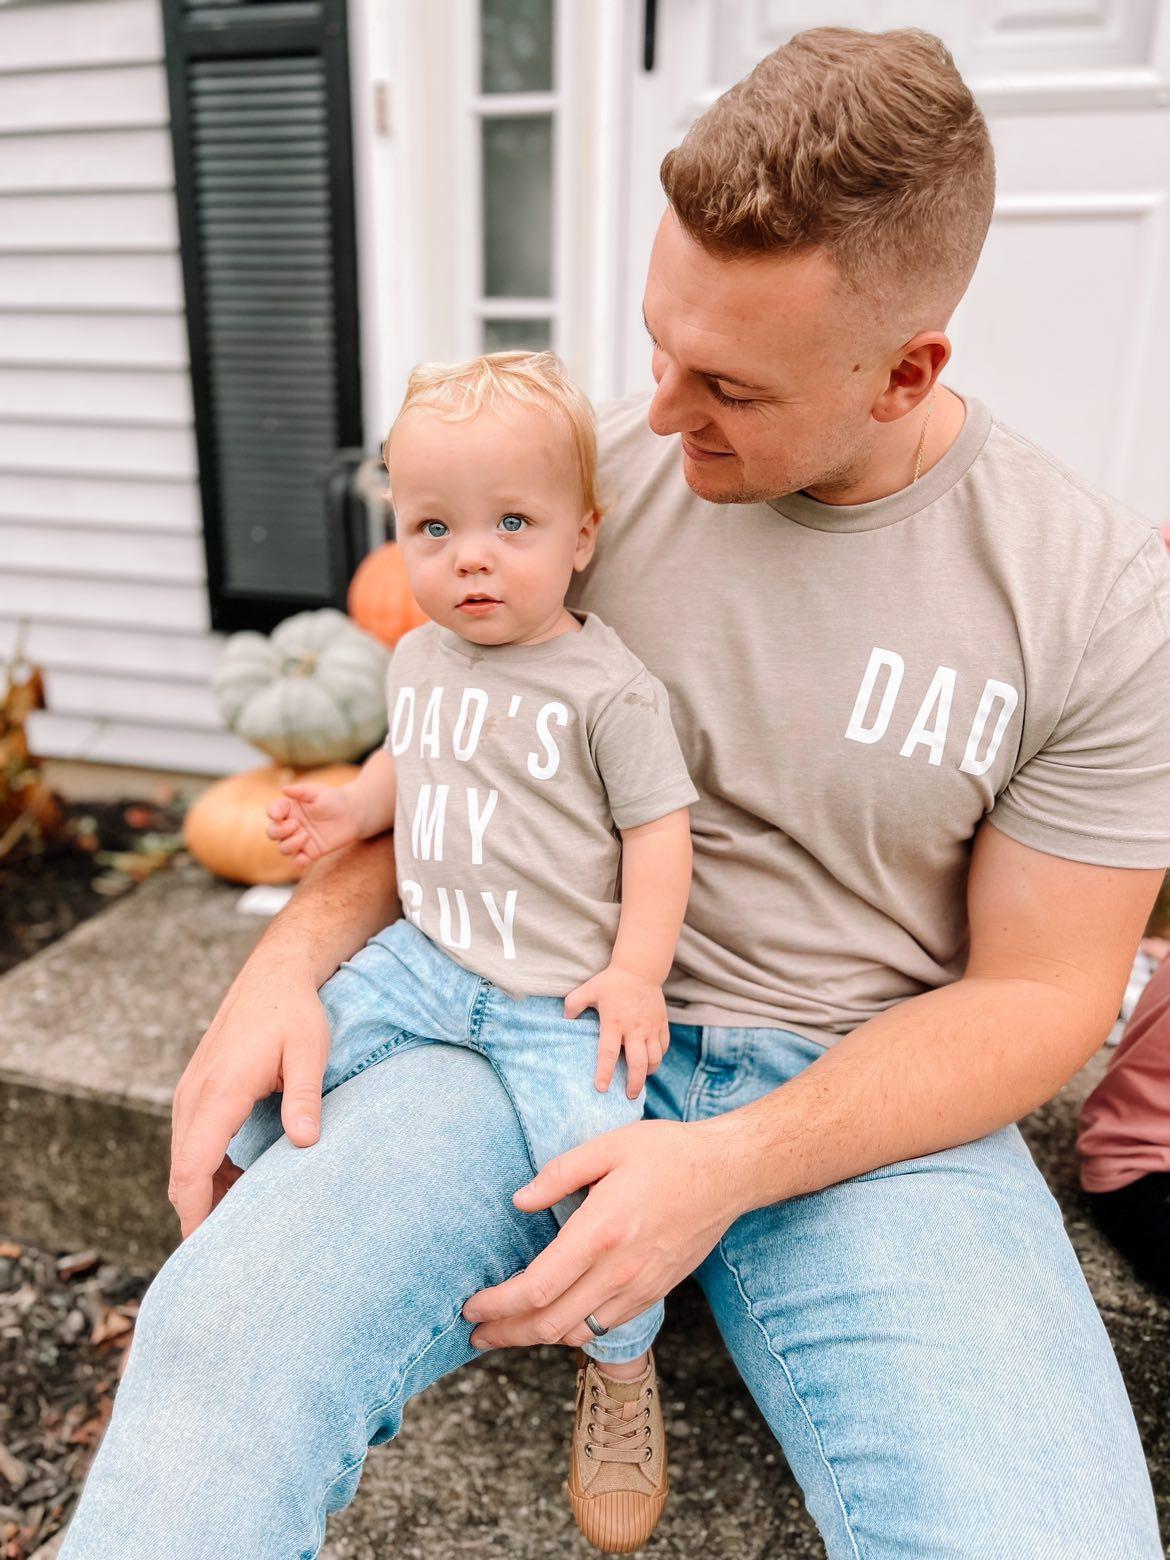 A dad and son wearing a set of brown “Dad’s my guy” t-shirts